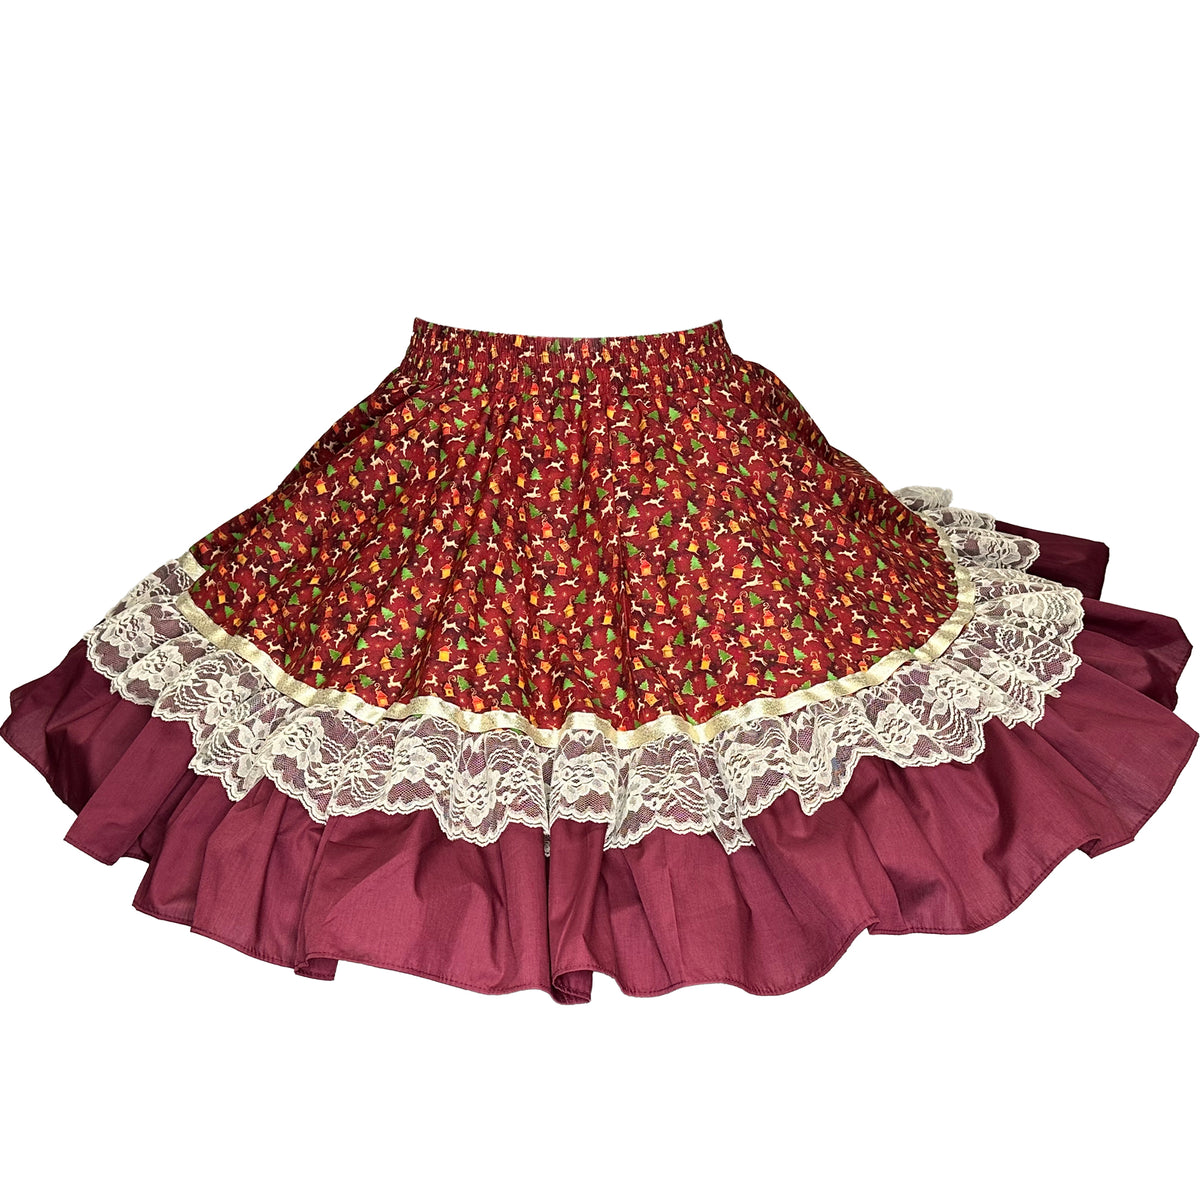 A Reindeer Square Dance Skirt with lace trim.